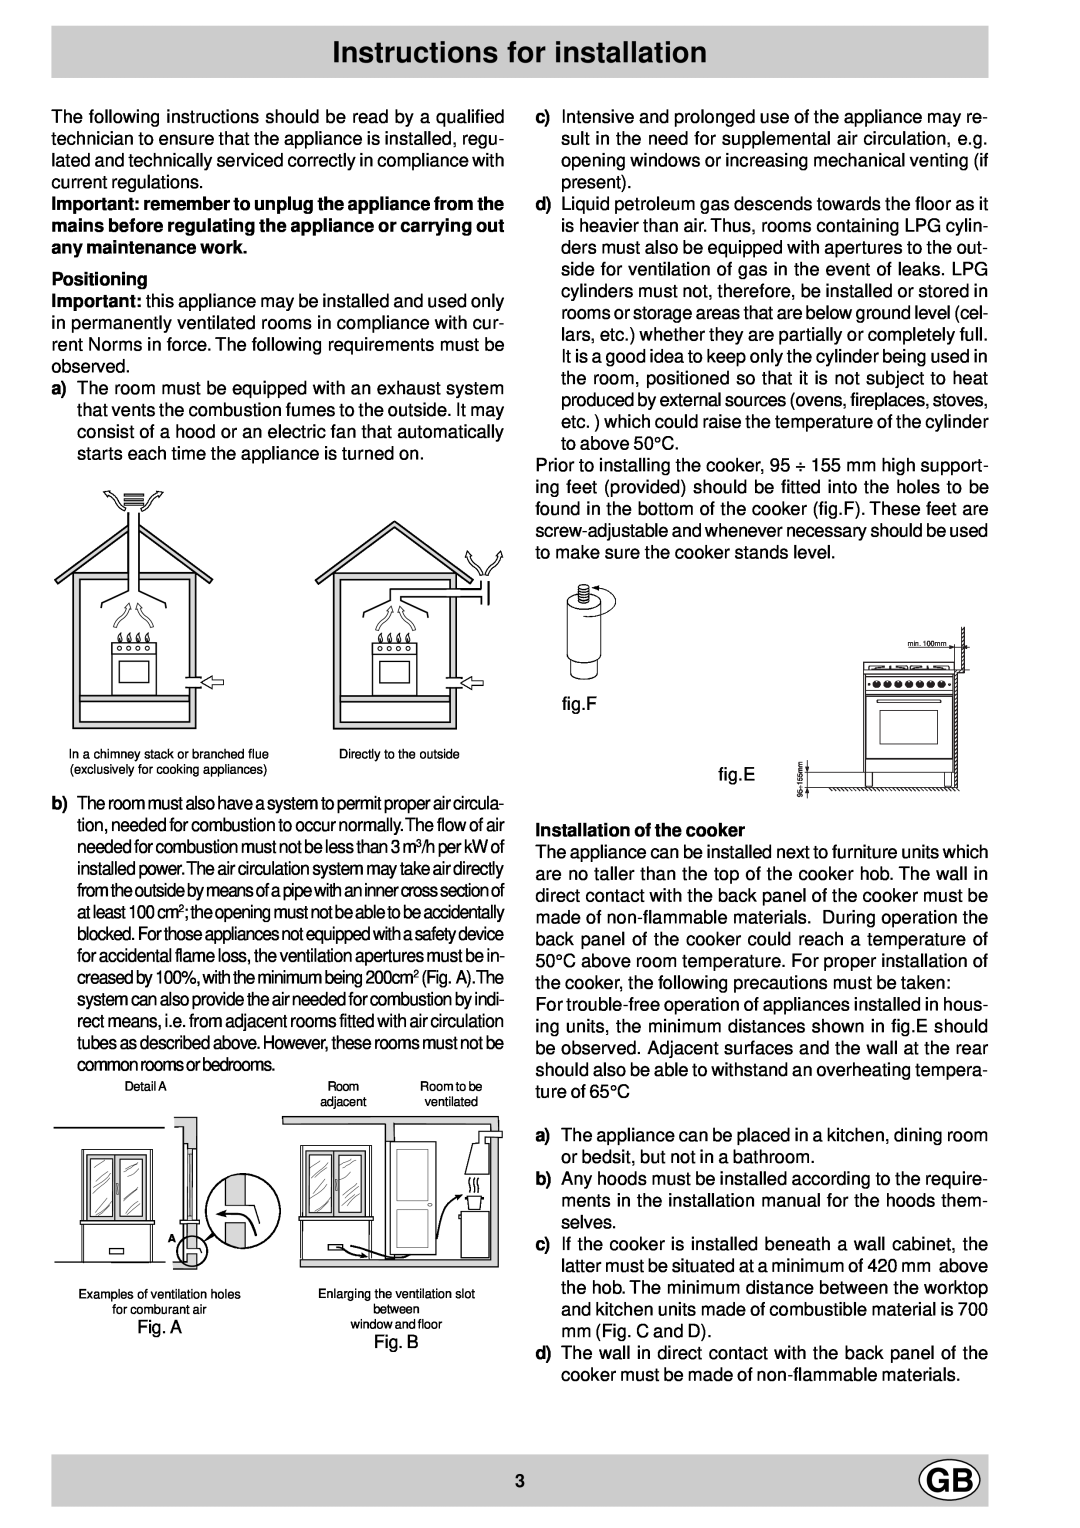 Hotpoint EG600P manual Instructions for installation, Positioning, fig.E, Installation of the cooker 